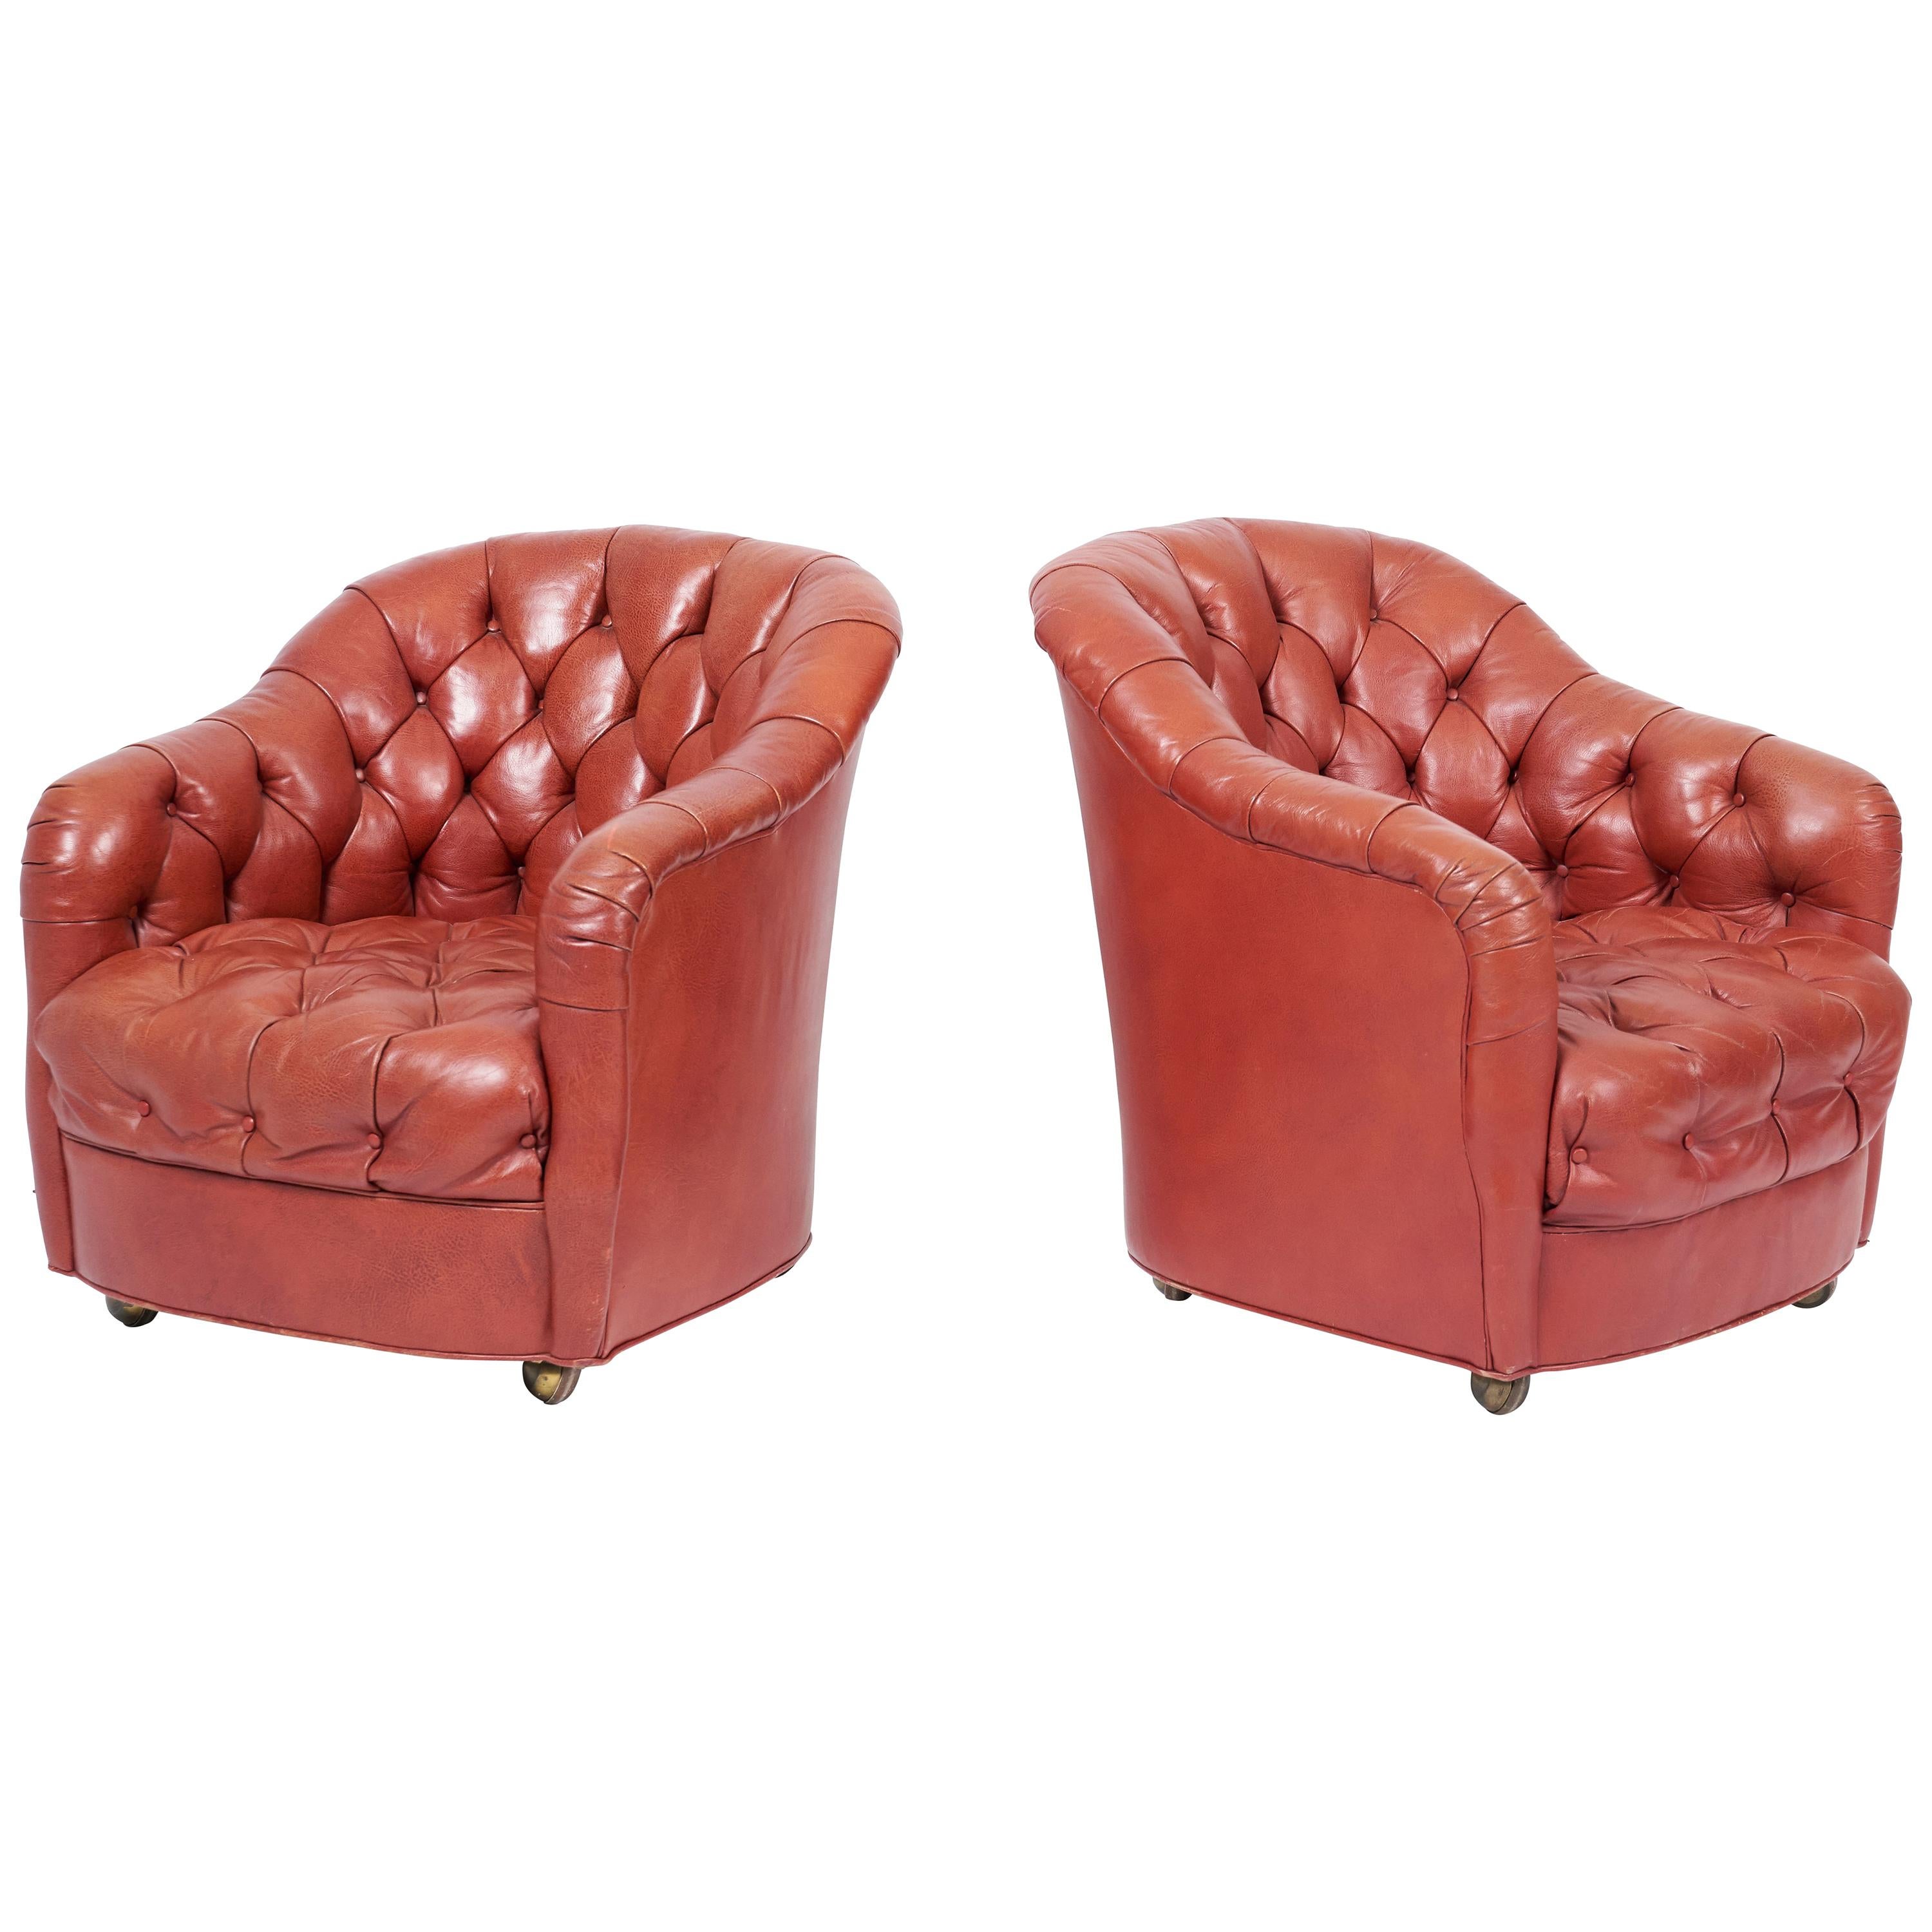 Ward Bennett Tufted Club Chairs, Original Red Leather